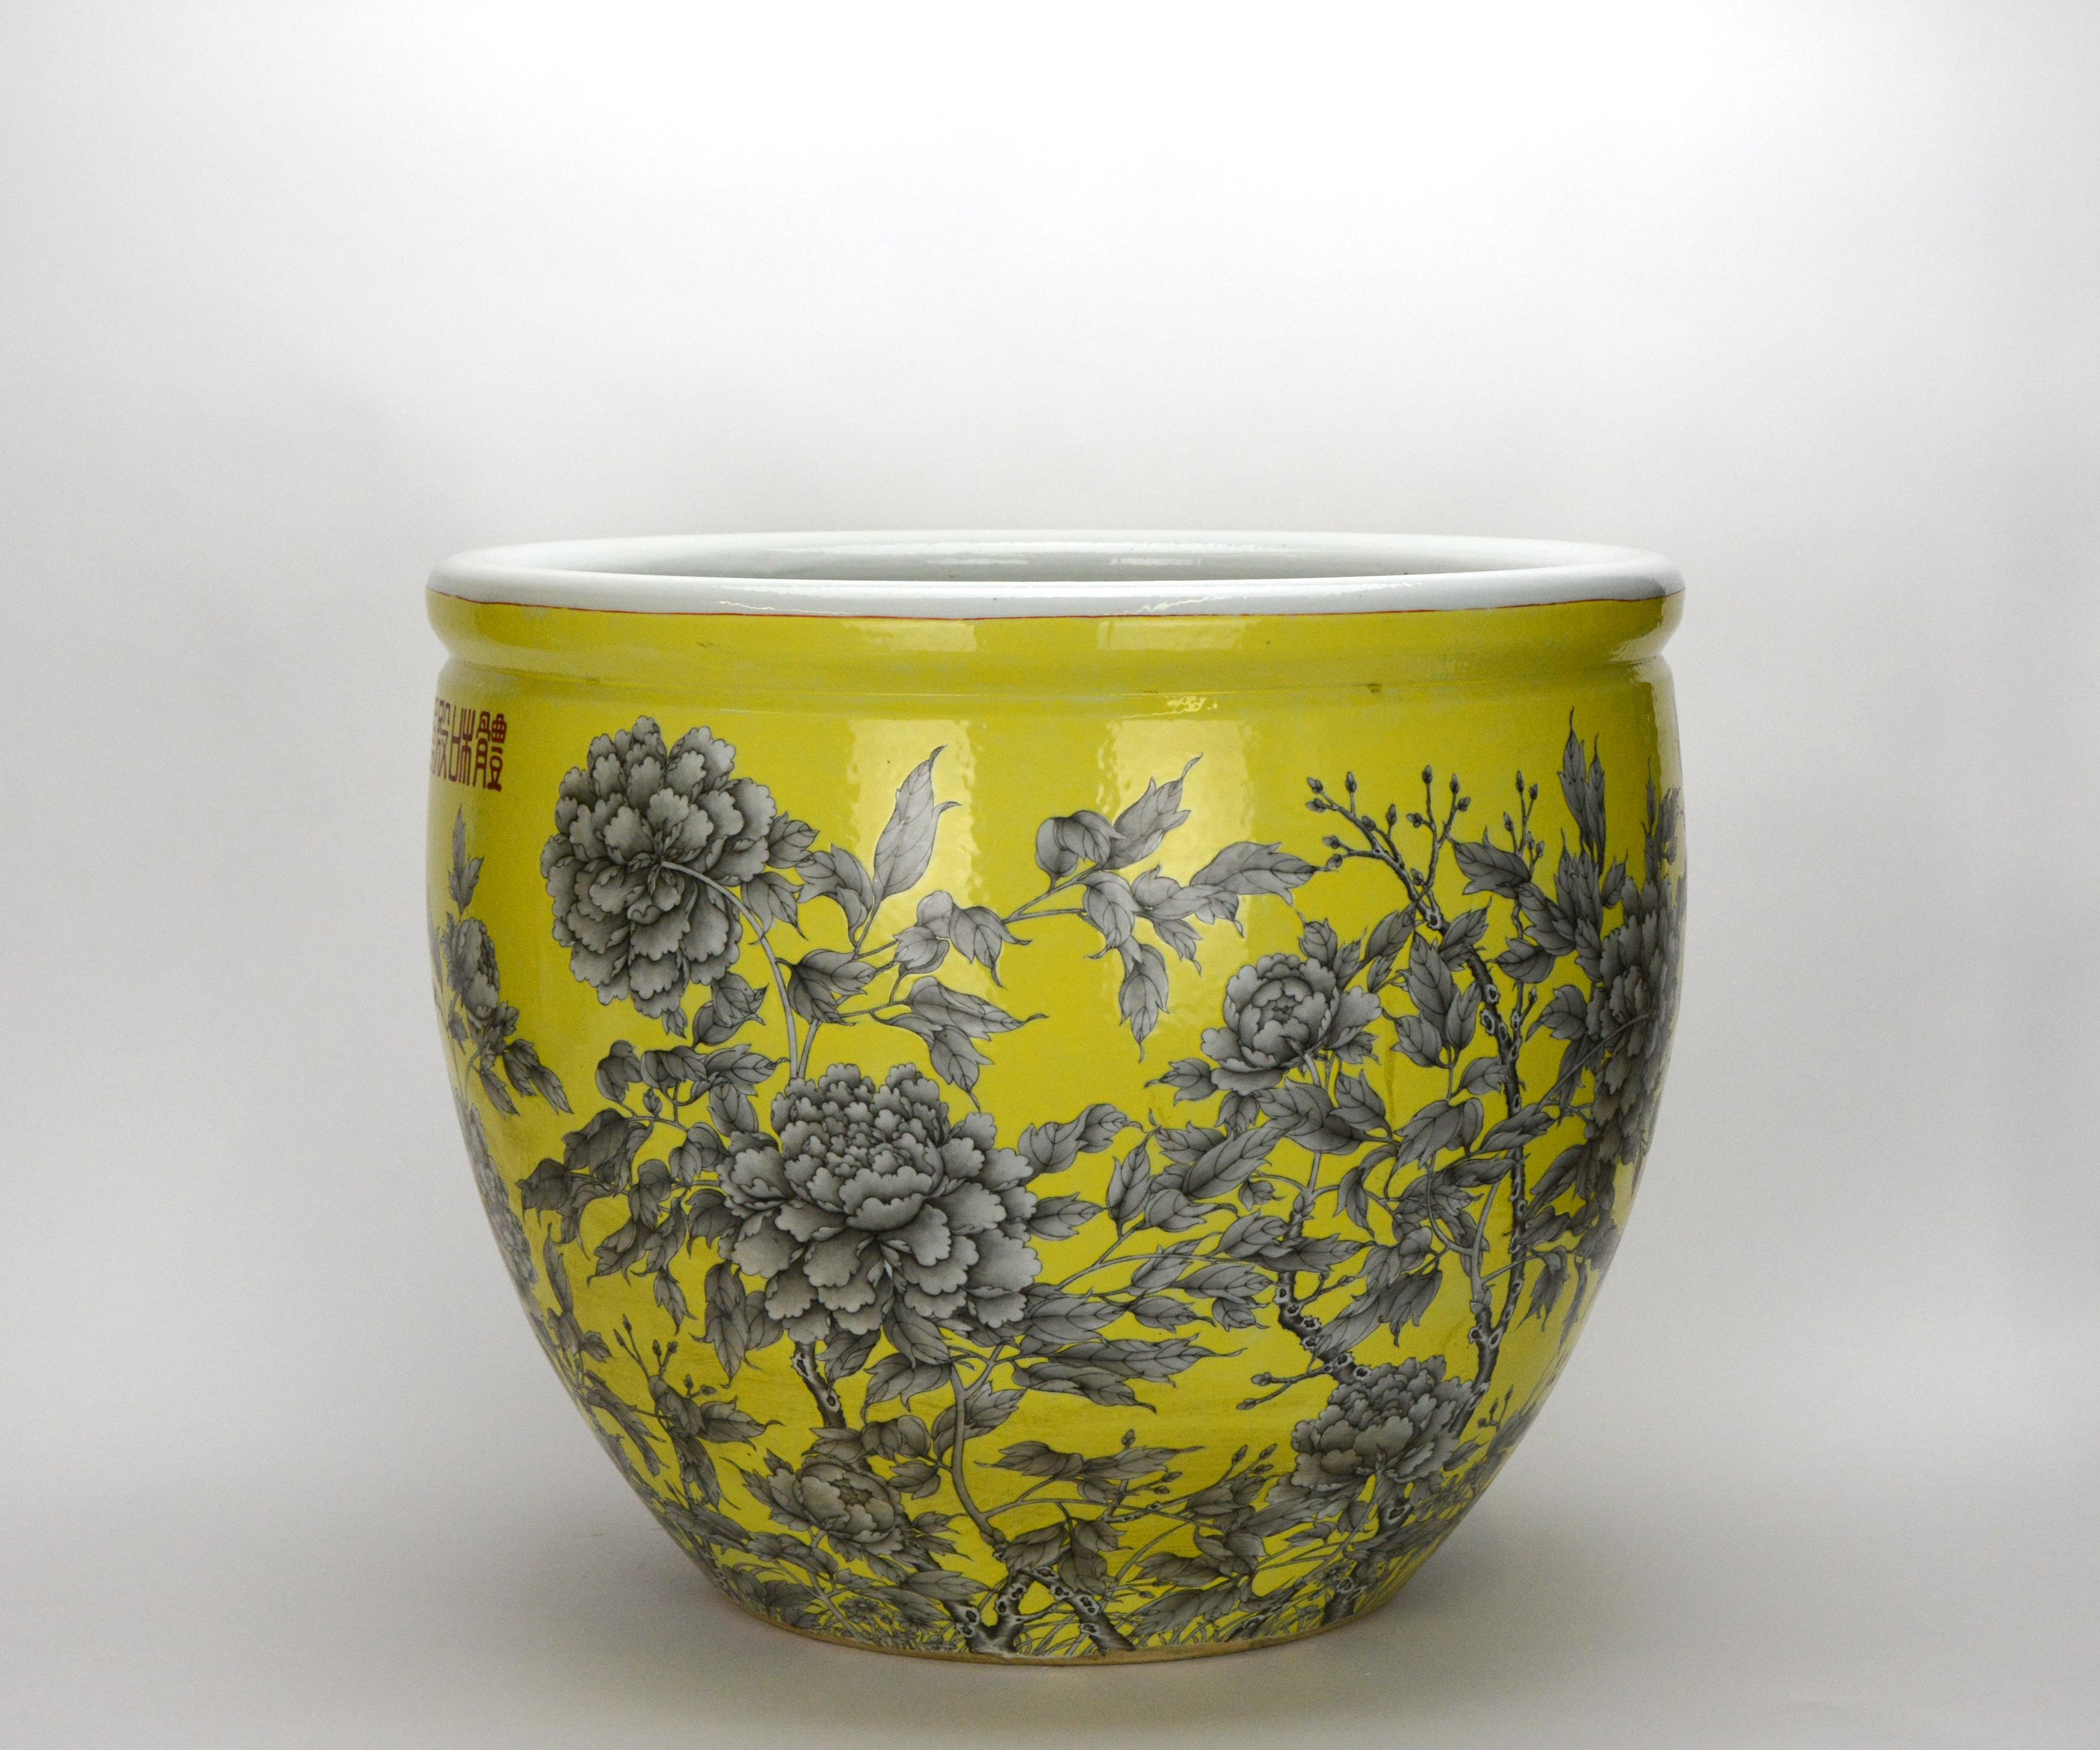 Here is a rare yellow ground black floral porcelain jardiniere from late Qing period. This entire jardiniere has yellow ground with black ink like floral paintings. A very large globular body with white enamel glazed interior. It has some normal